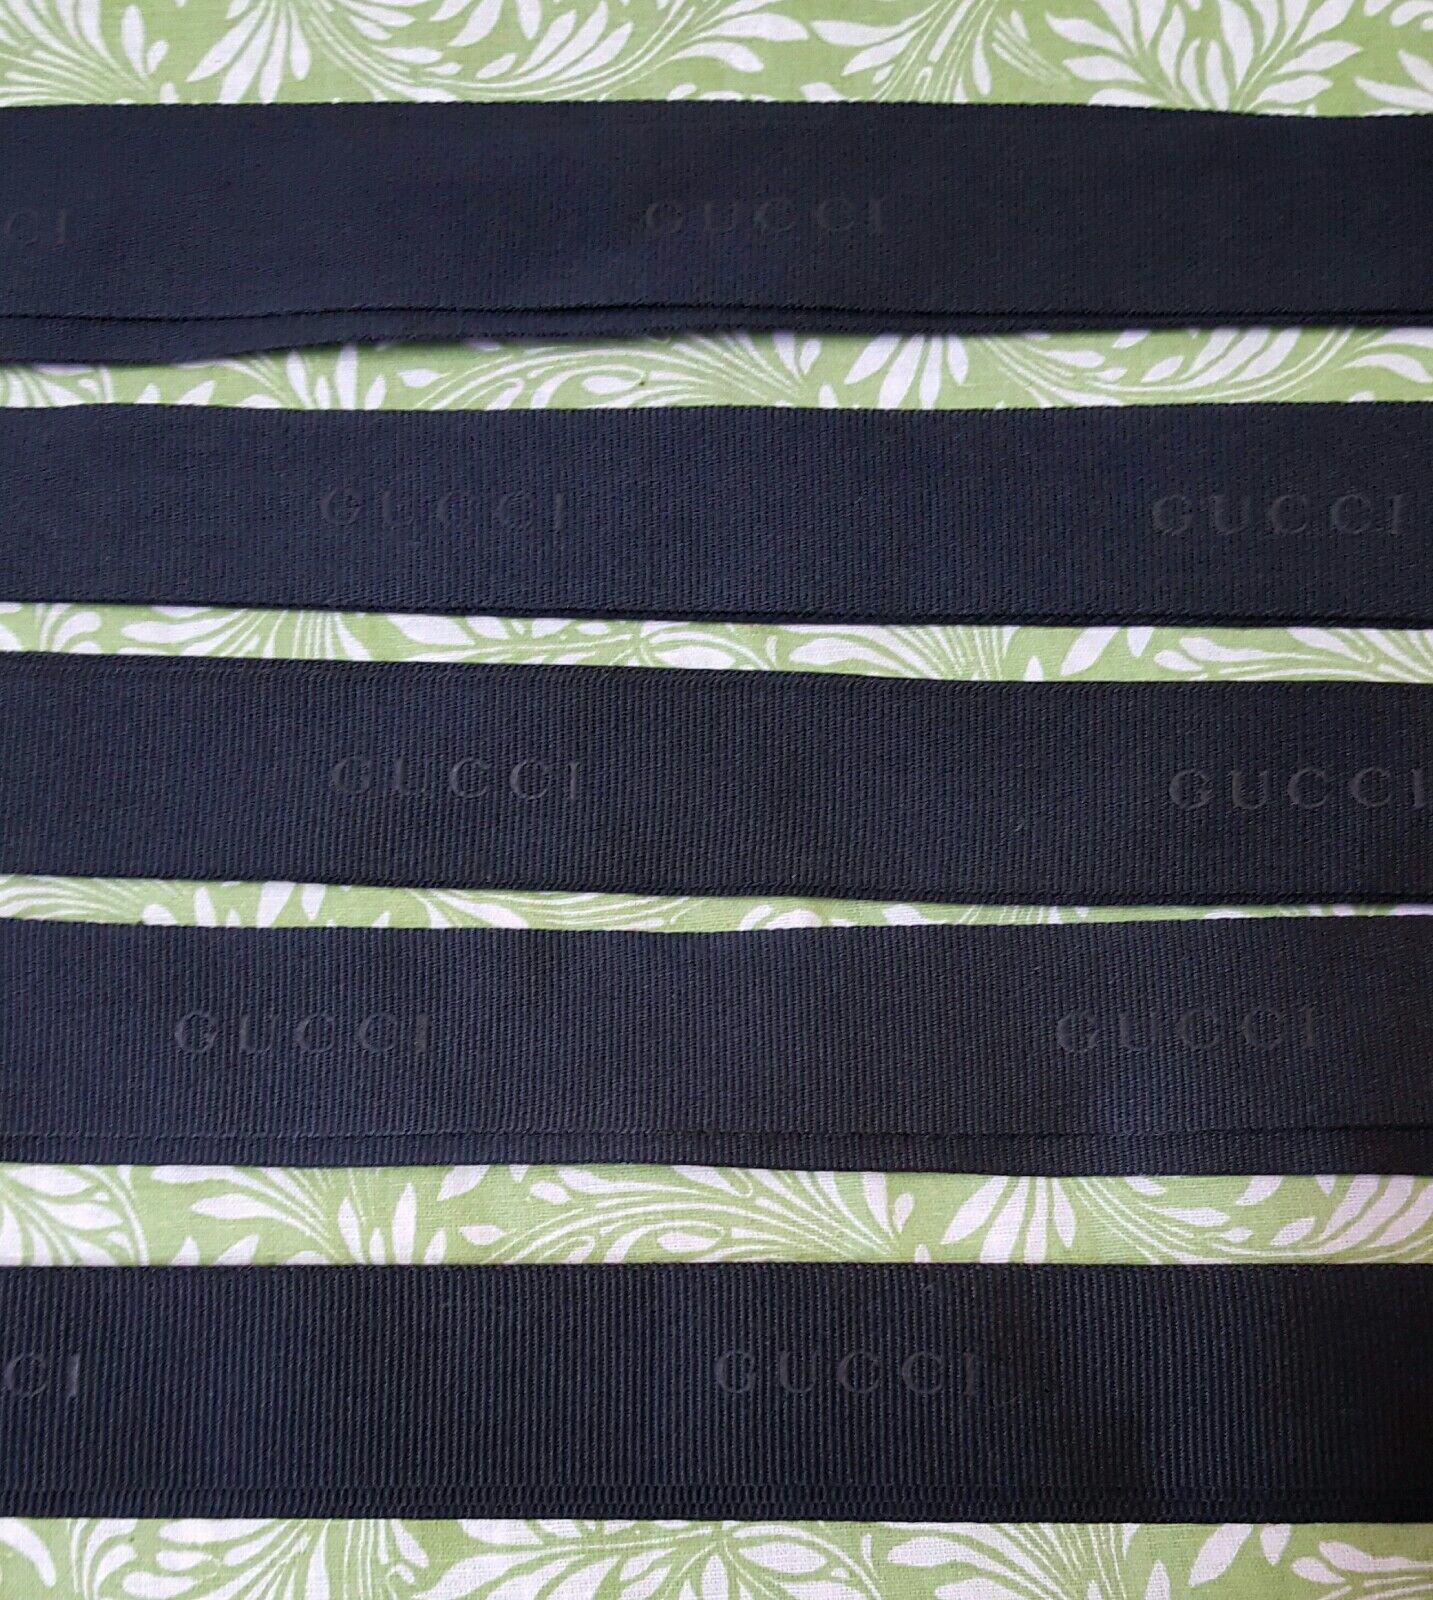 Gucci Black/Black 1.25"  Ribbon - $18 for two yards....Free Shipping